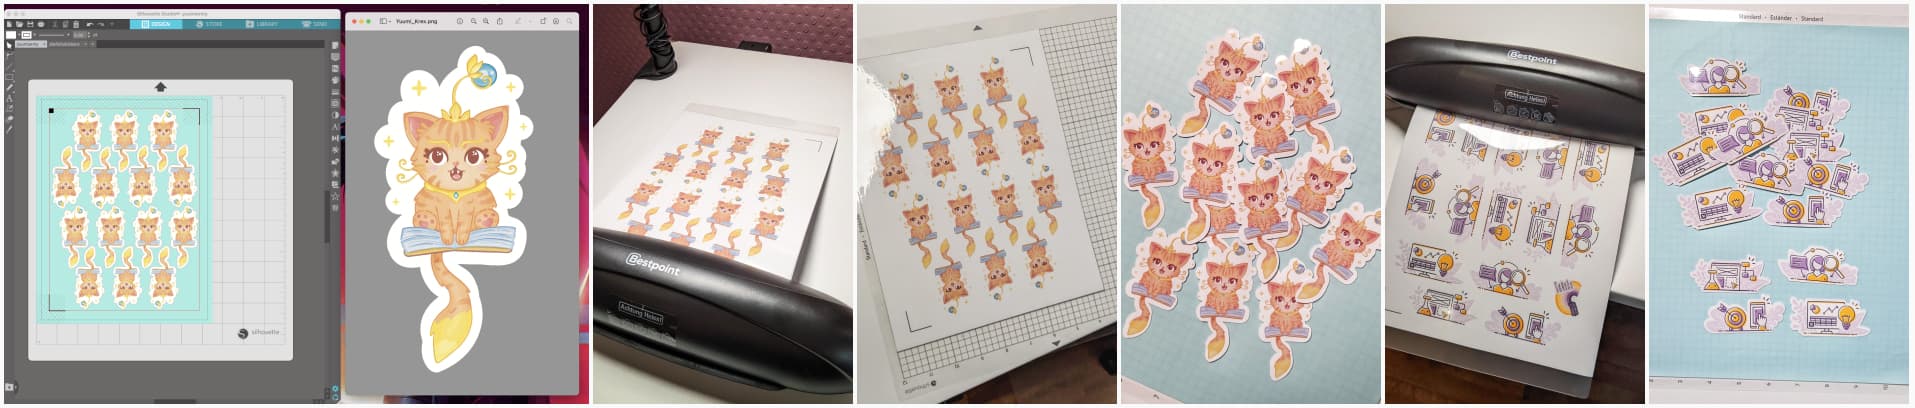 Some Yummi (and orange magic cat floating on a book) displayed in a software, the same ones in the lamination machine, then the final ones cut. A second sheet of stickers with illustrations from my homepage in the lamination machine and cut.